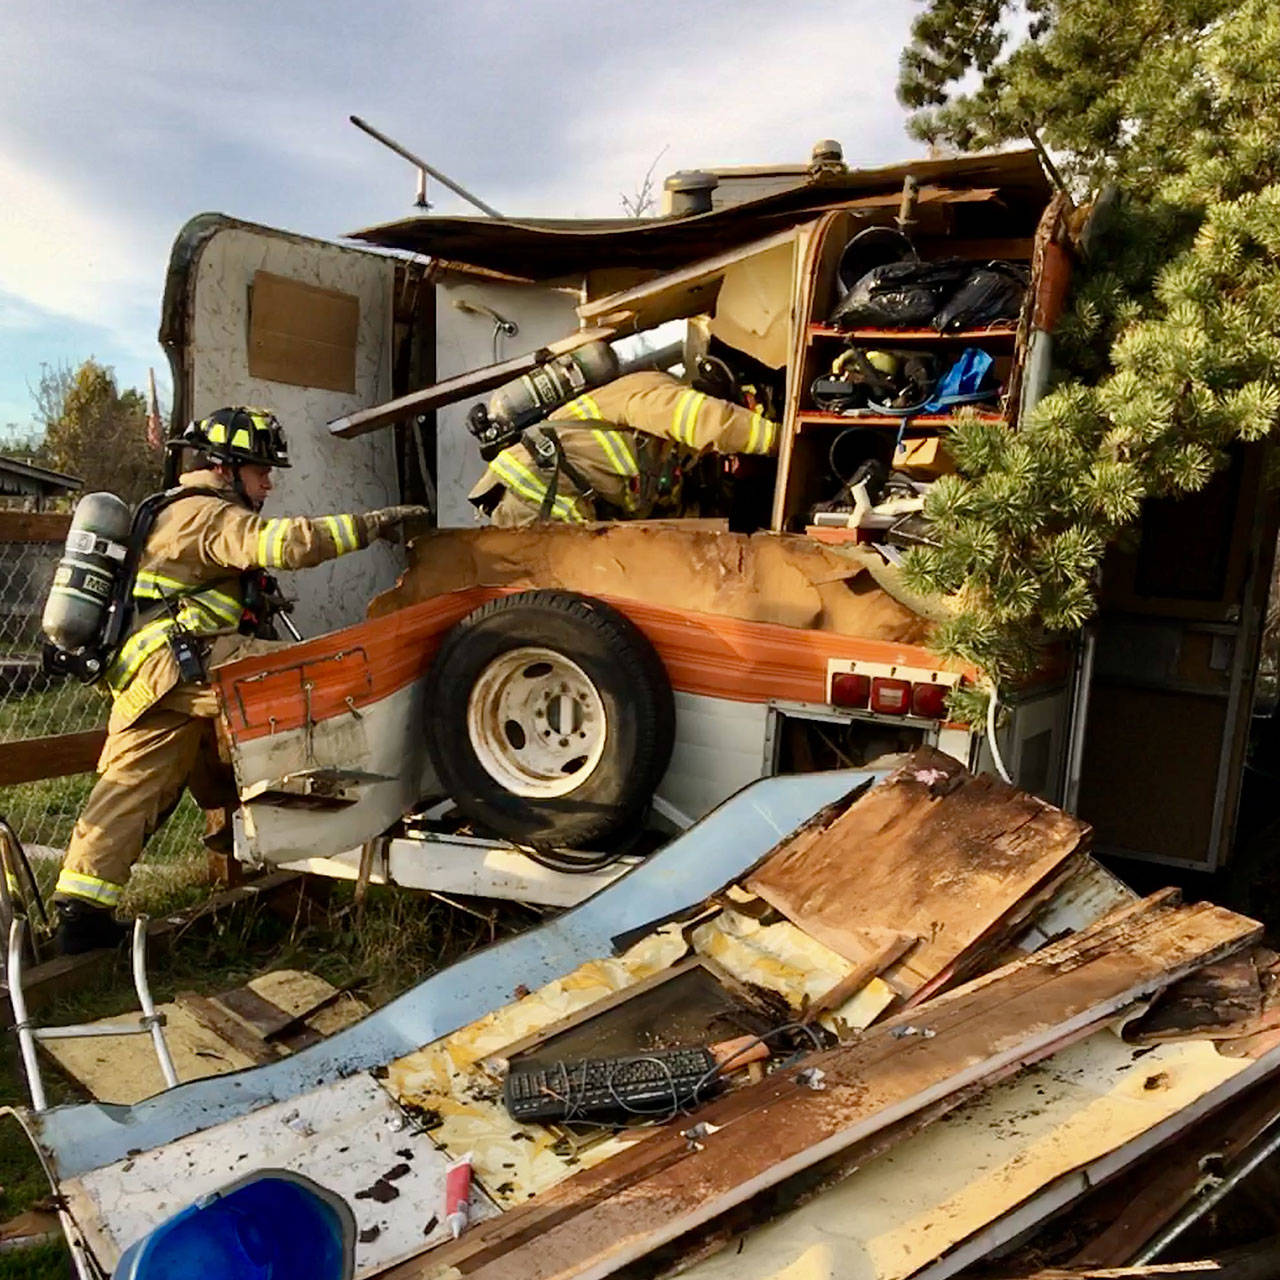 A Port Townsend man suffered burns to his hands when a propane explosion blew off the back wall of his RV. (East Jefferson Fire-Rescue)